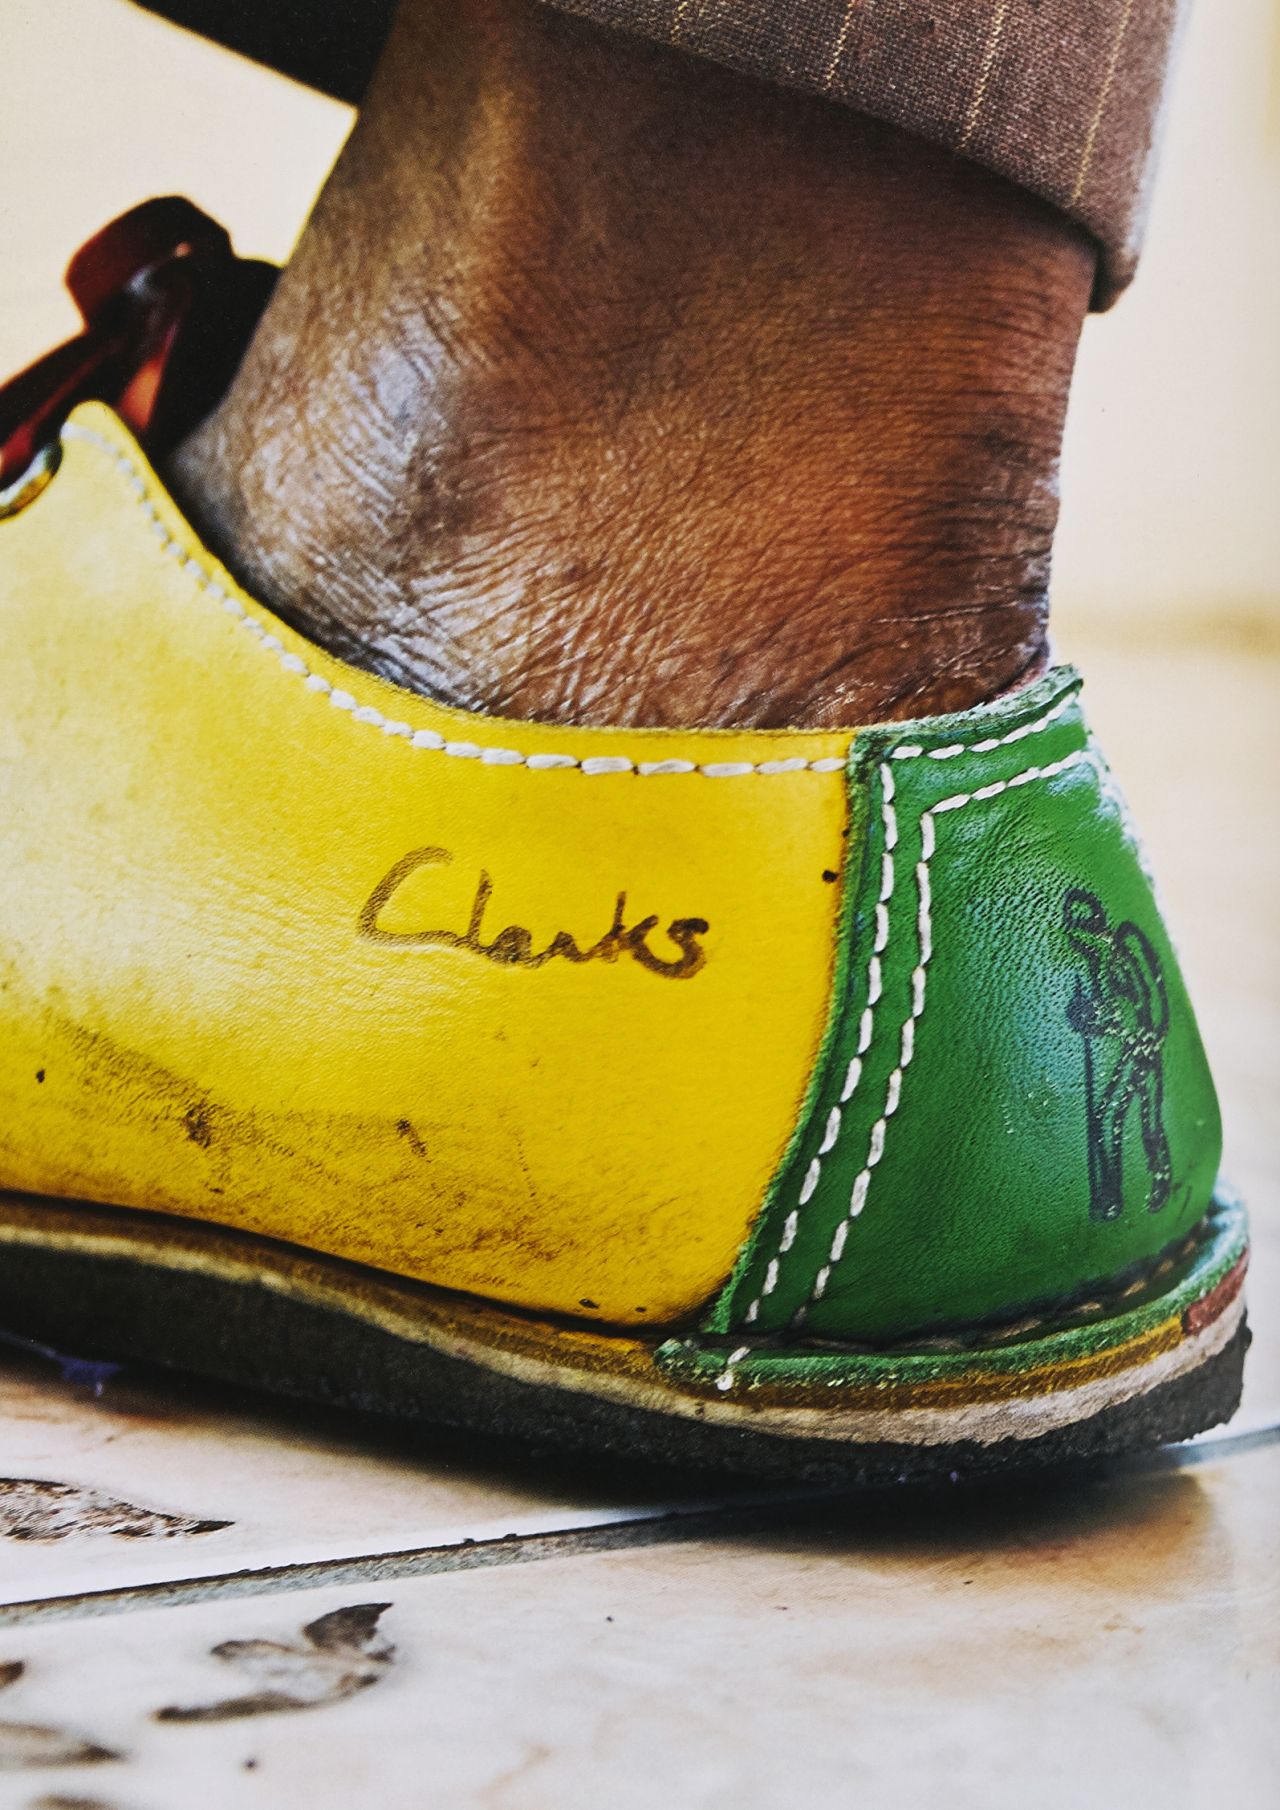 Clarks in Jamaica: Al Fingers revisits the Caribbean island's